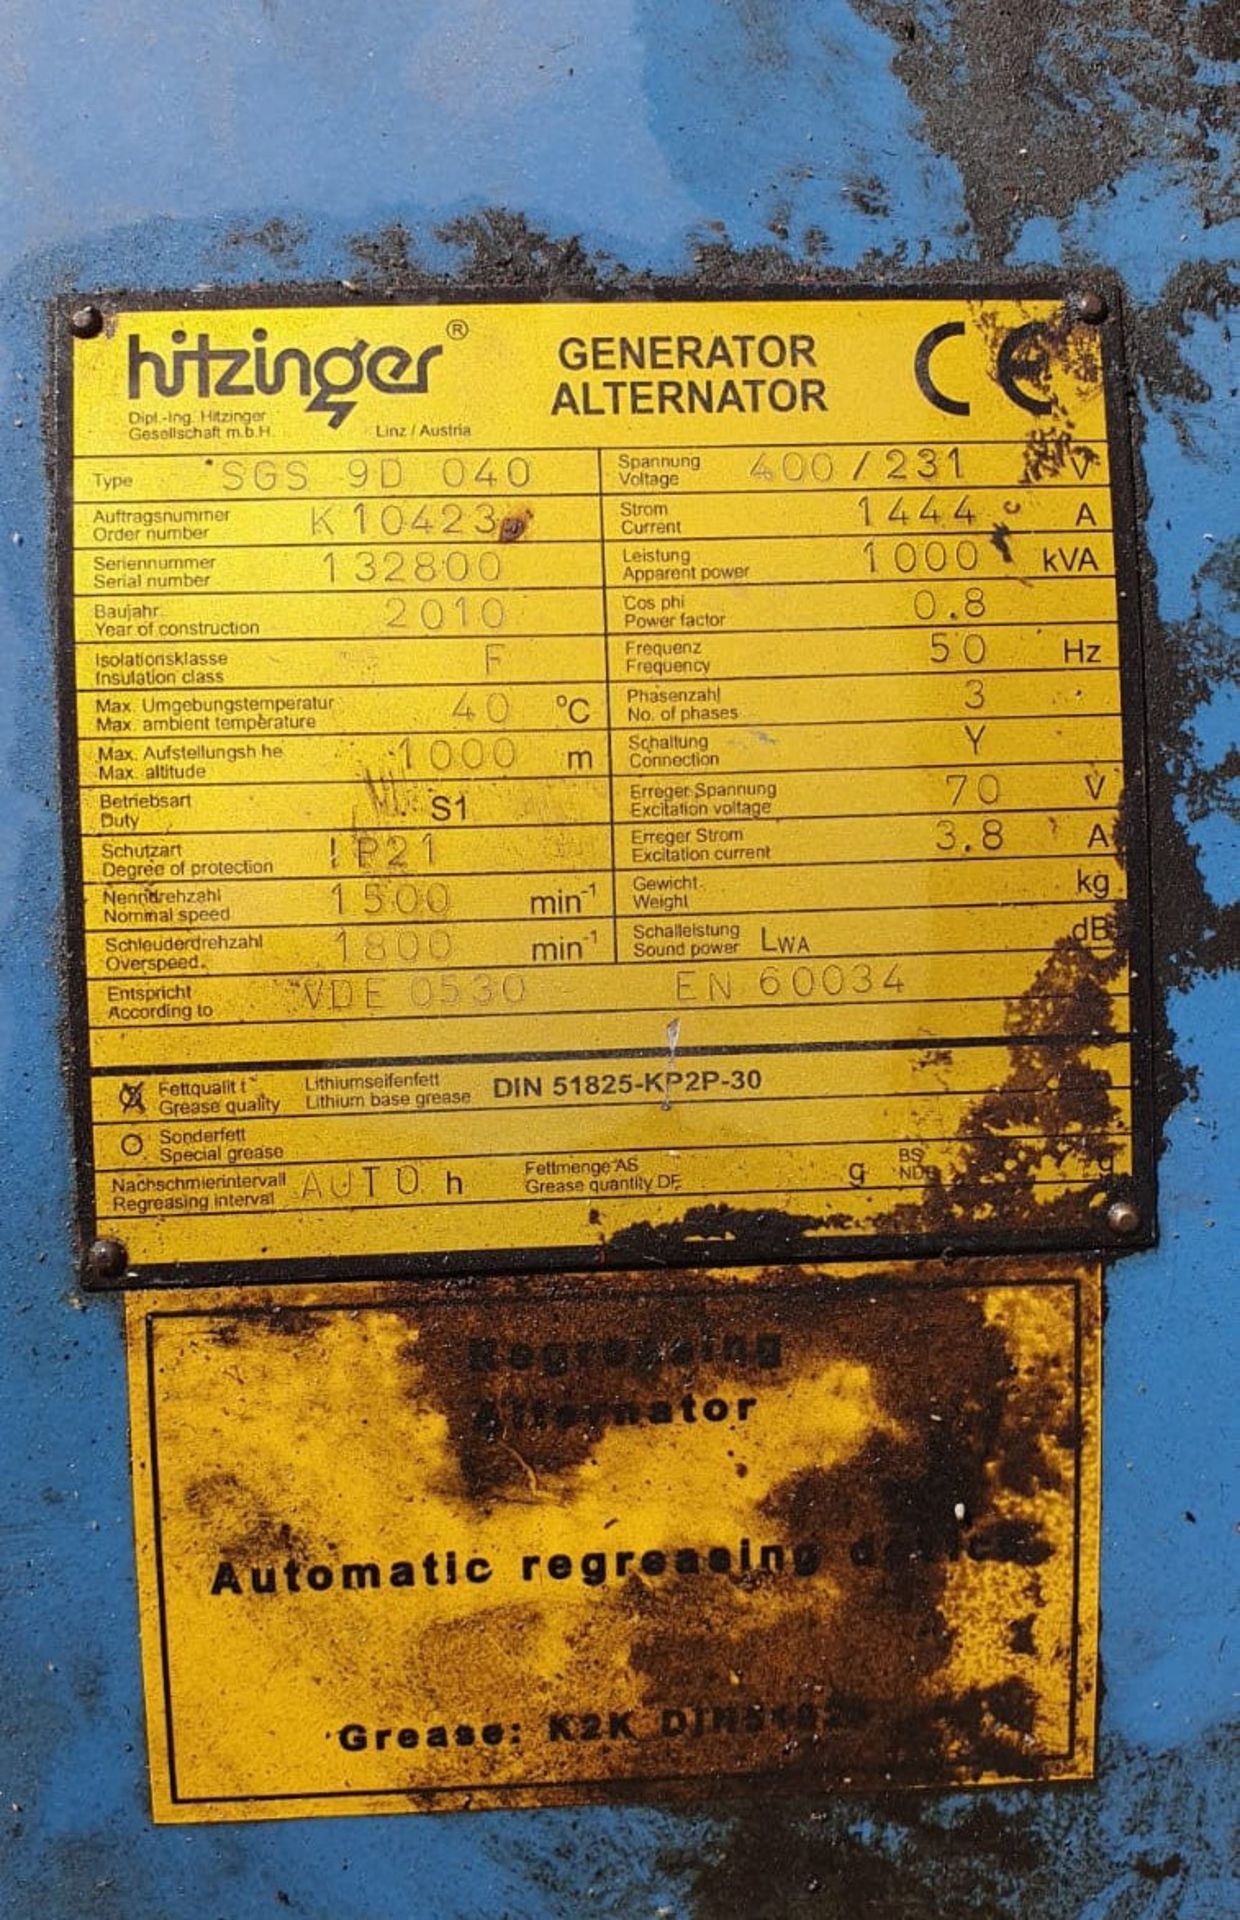 1 x 1987 Hitzinger SGS 9D 040 Generator - Only 800 Hours Use - Ref: T4UB/HZ - CL333 - Location: - Image 4 of 20